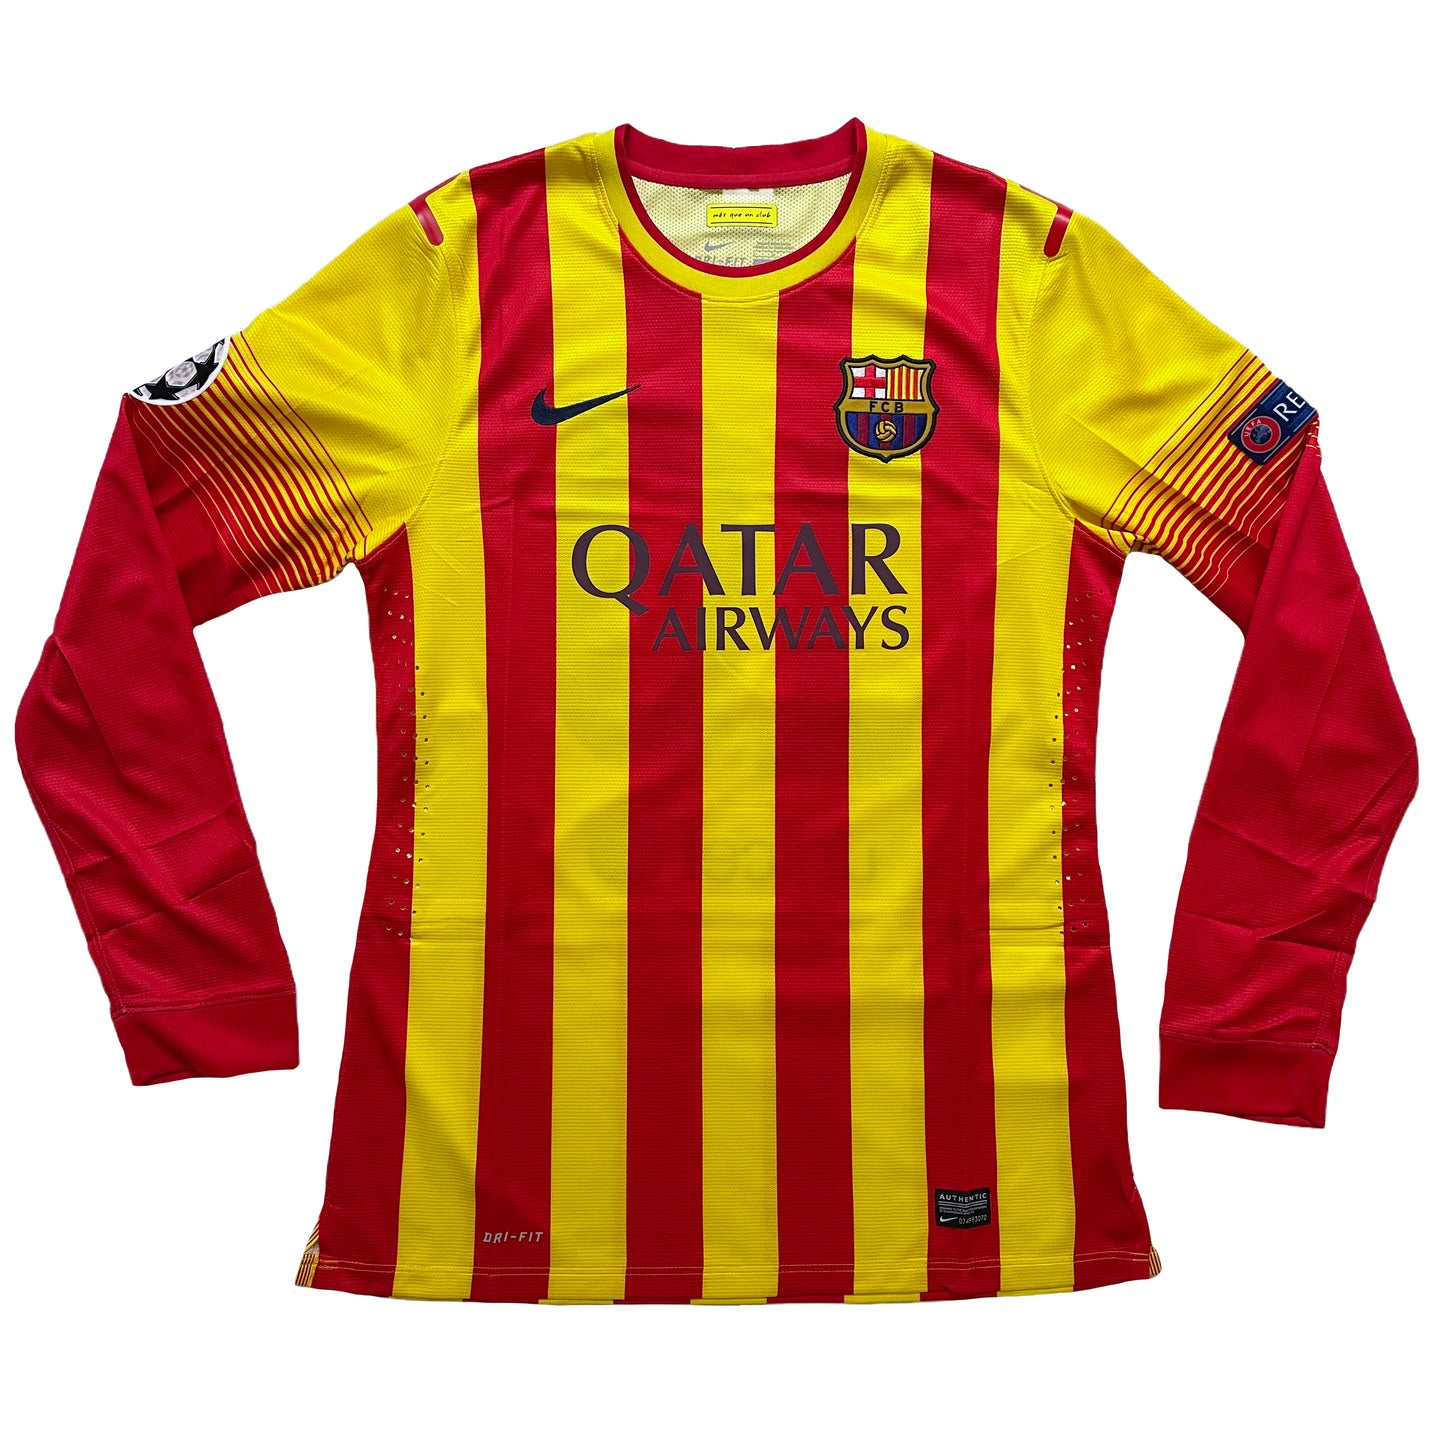 2013-2014 FC Barcelona Player Issue away shirt #10 Messi (L)